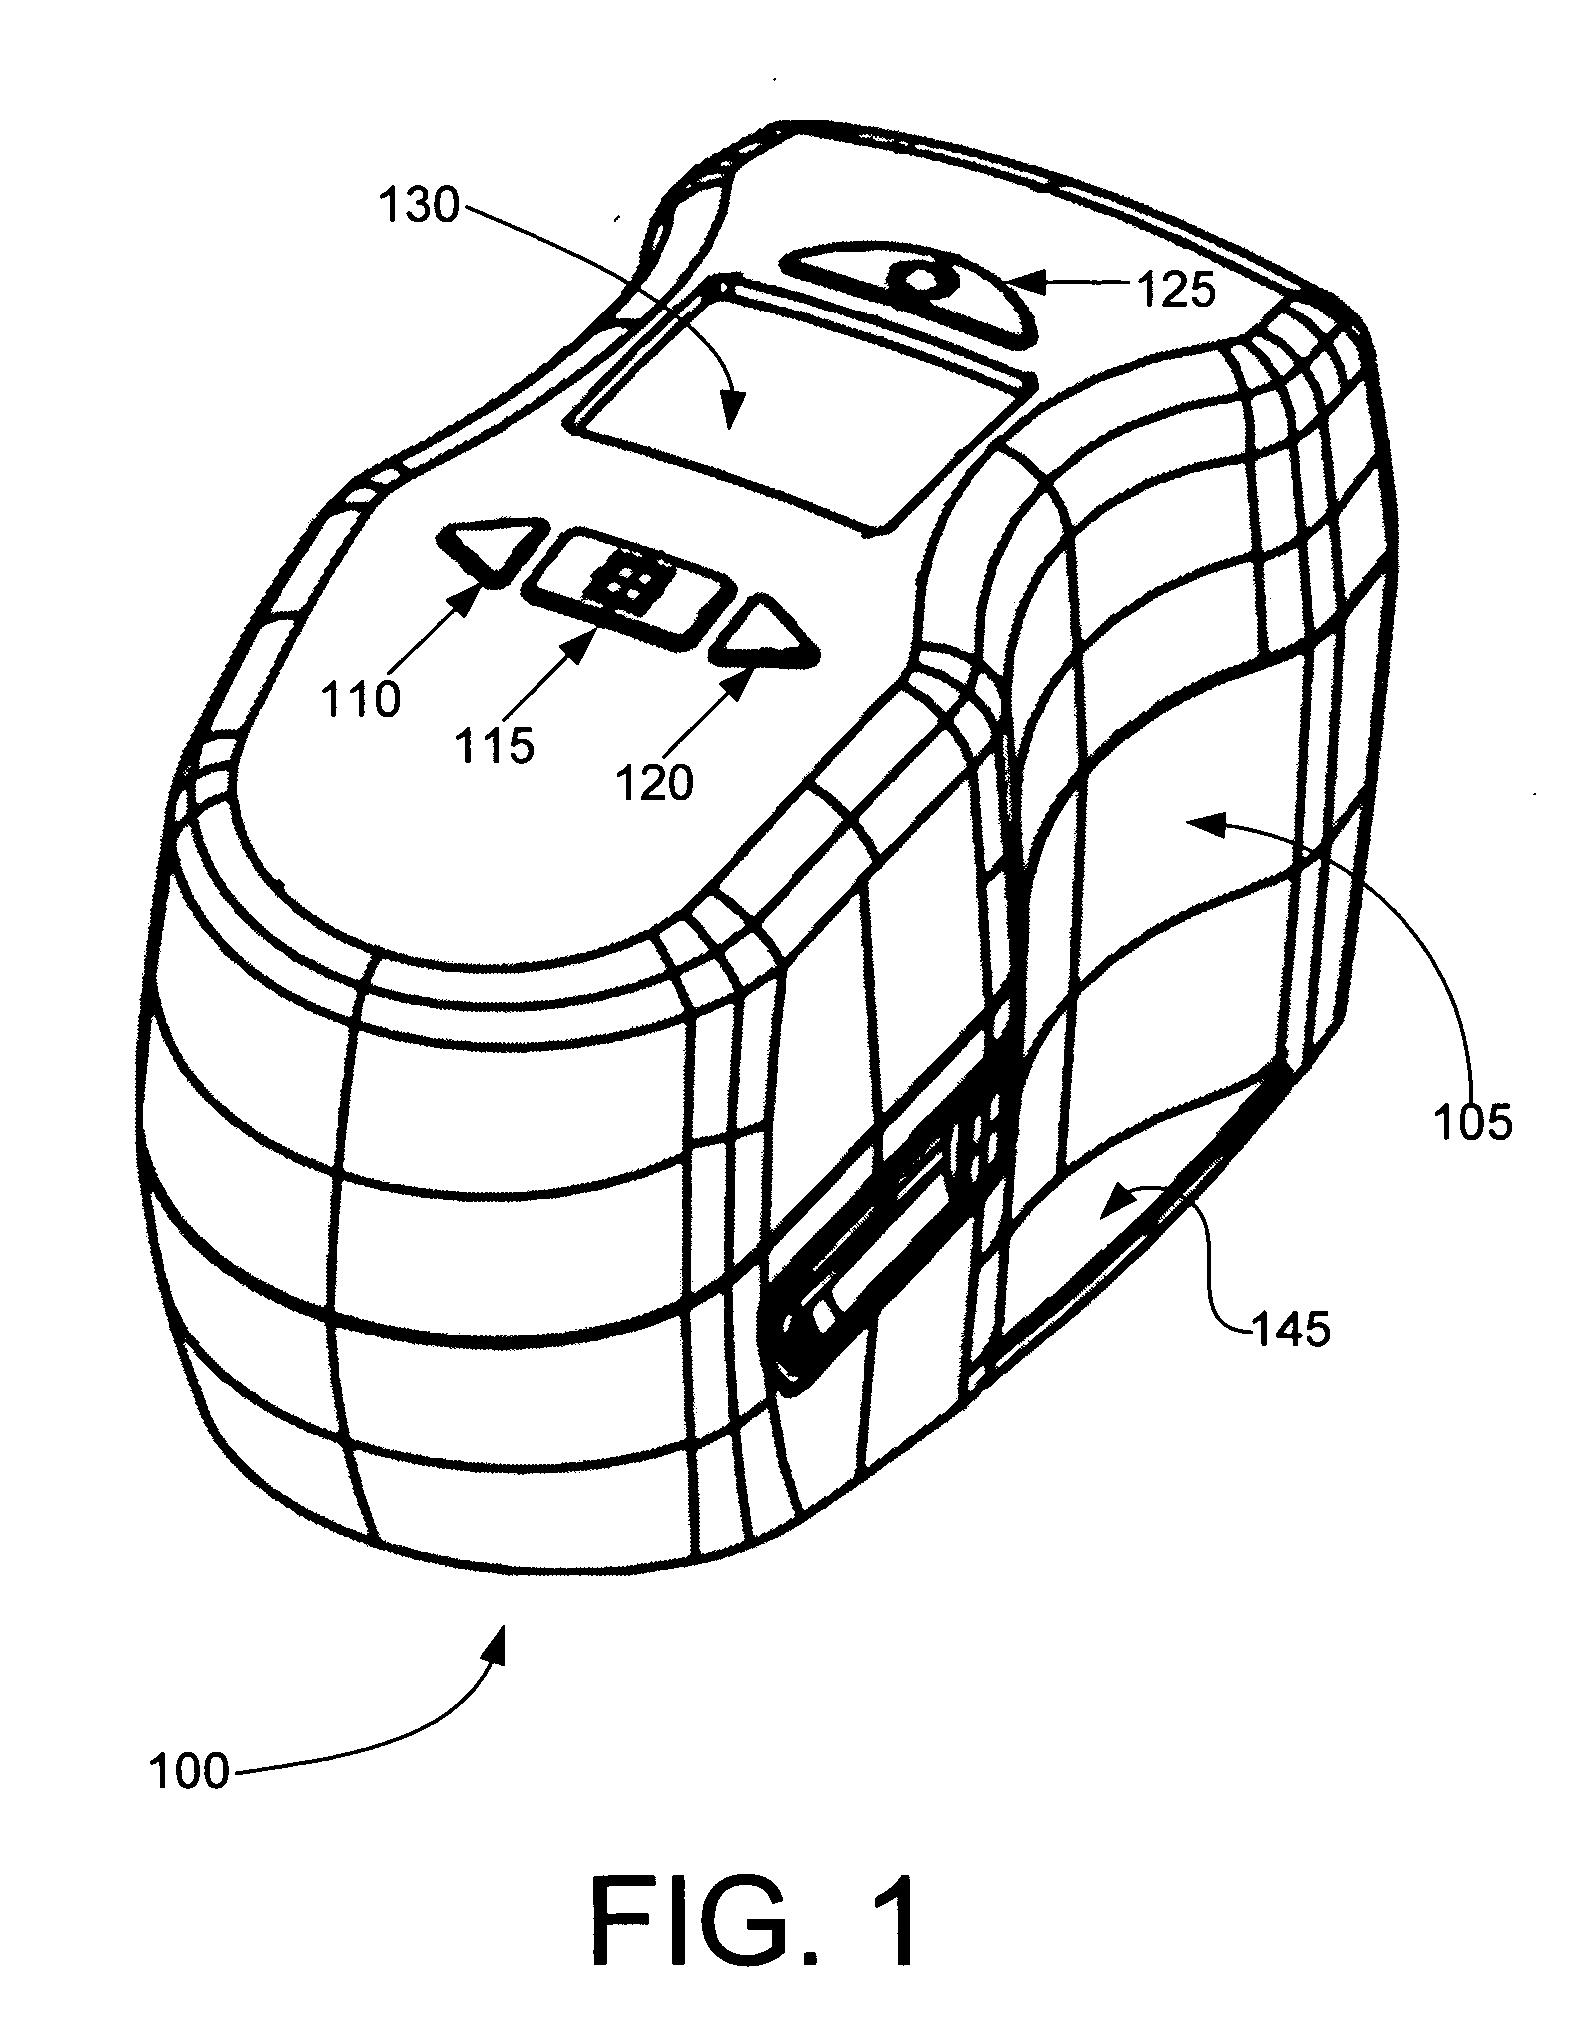 Methods and apparatuses for measuring print area using hand-held printer